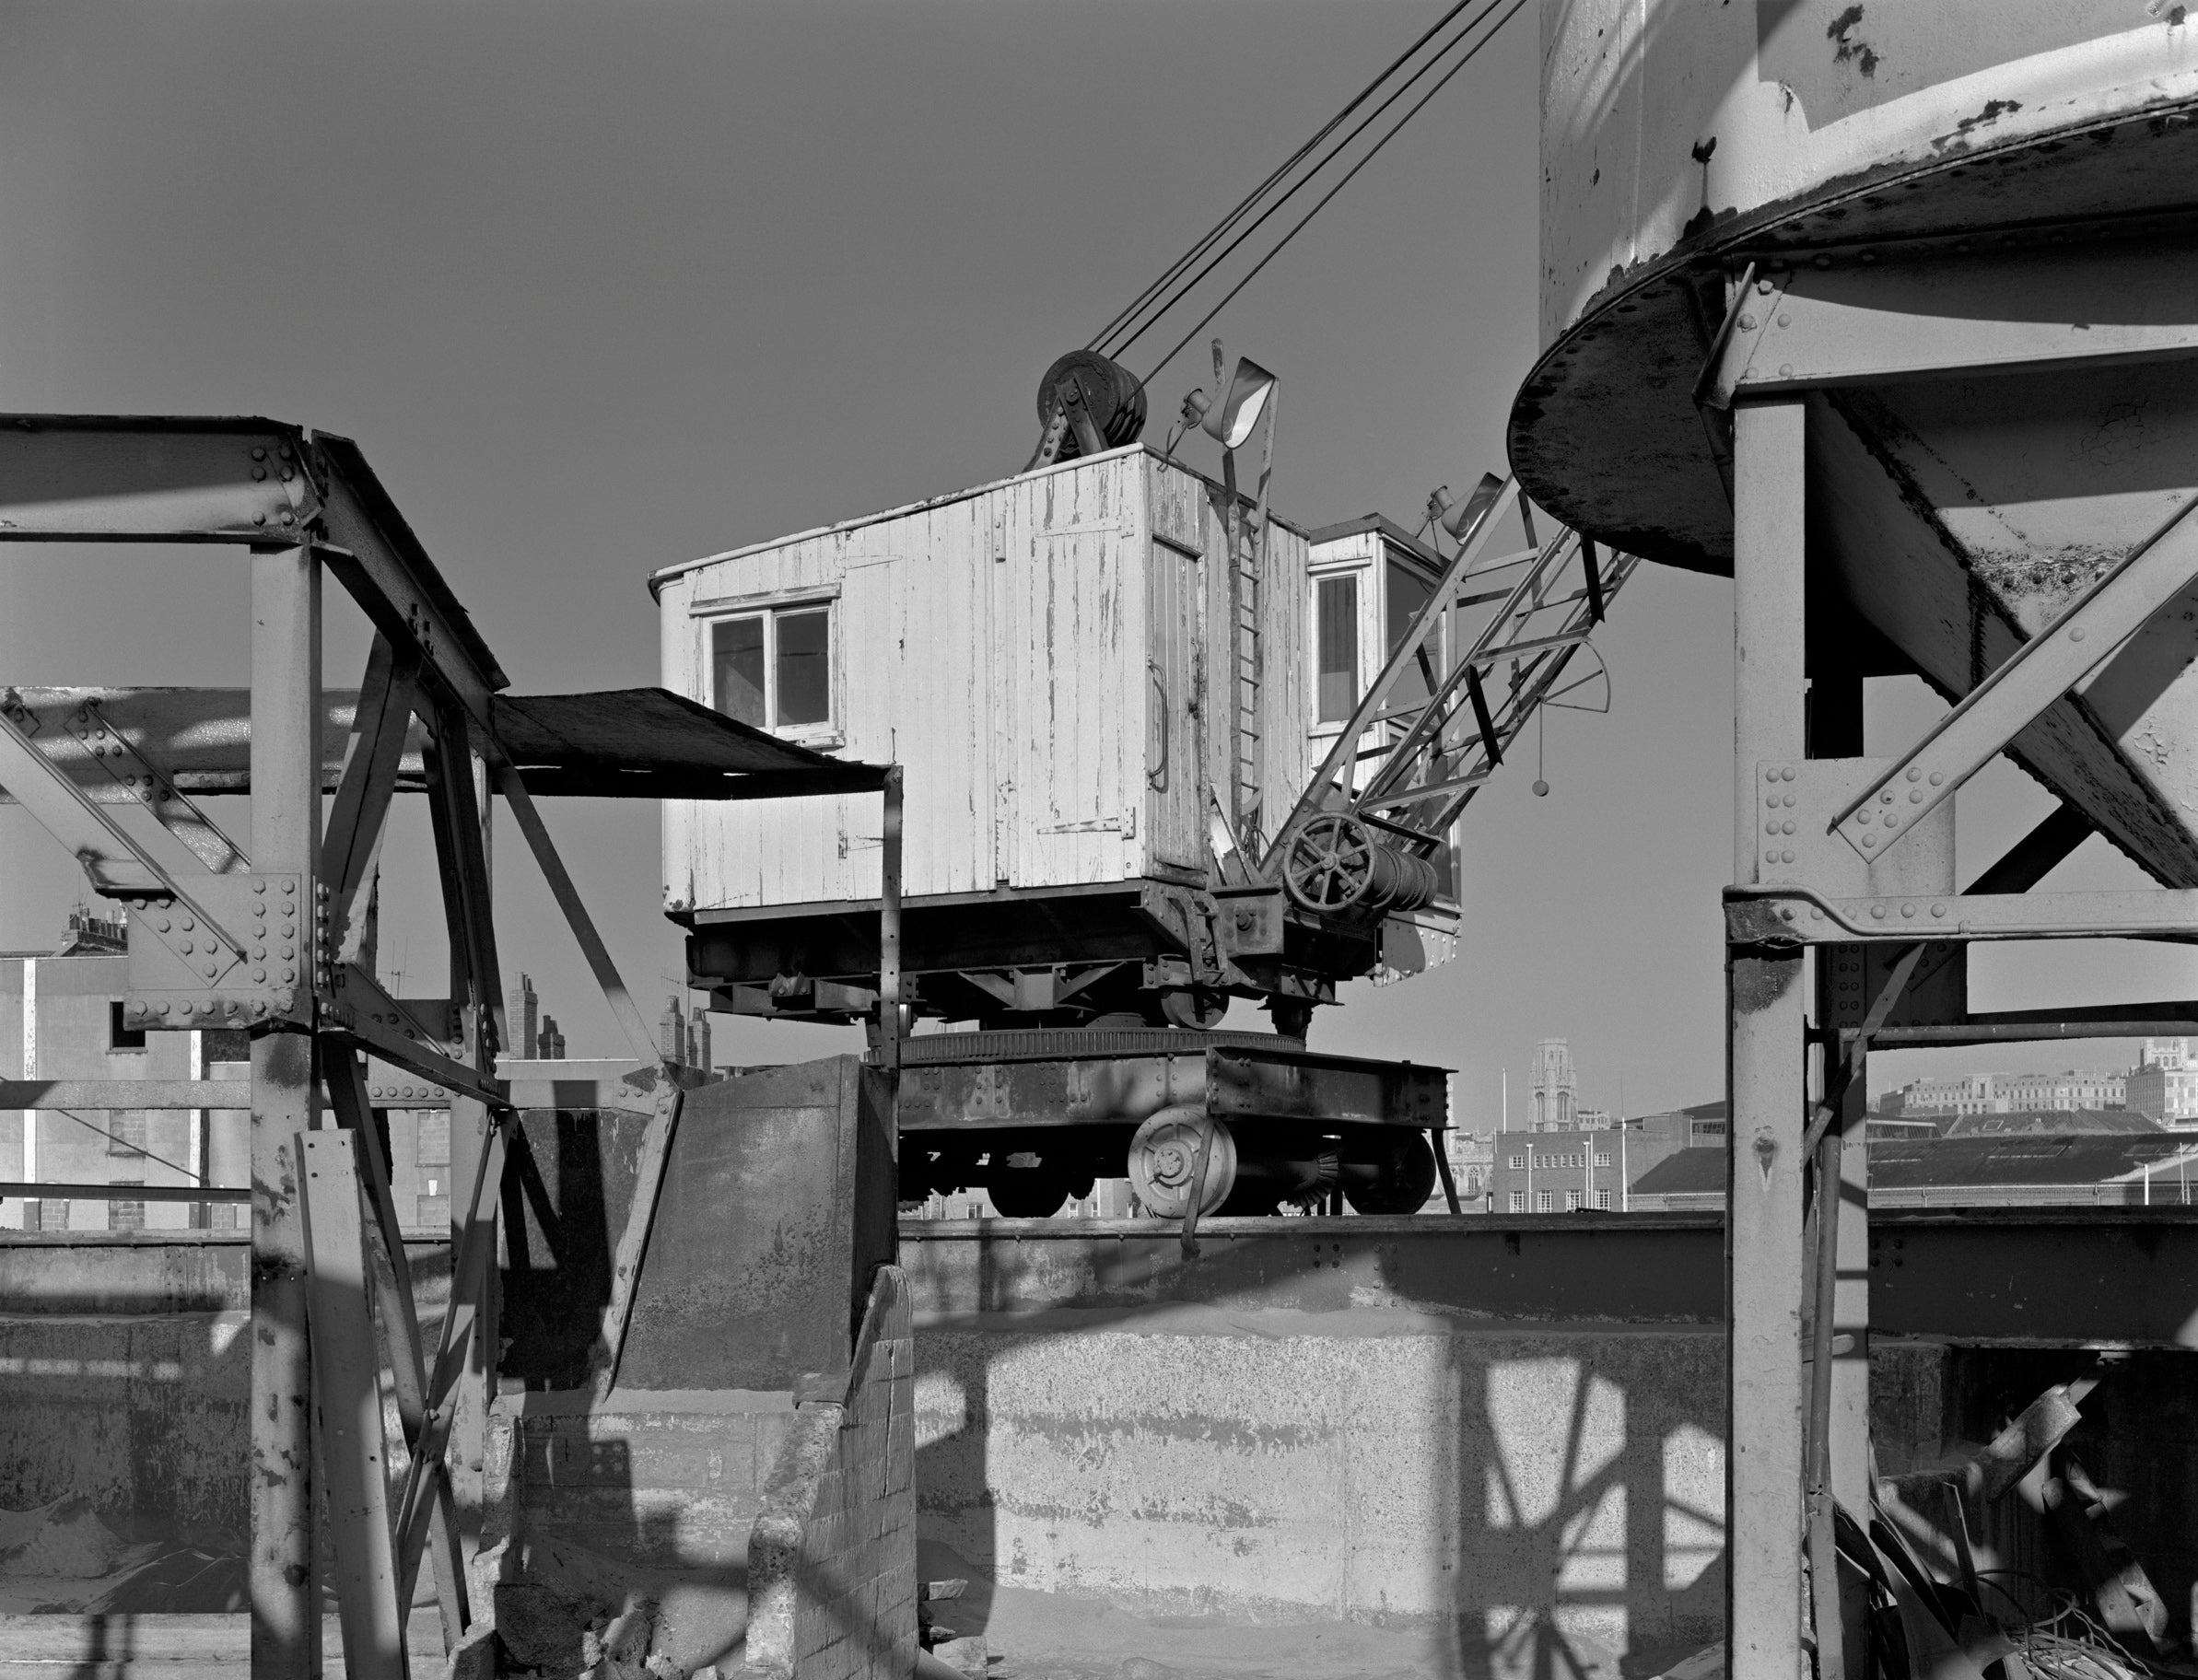 The Harbour - 16 x 20 " silver-gelatin prints